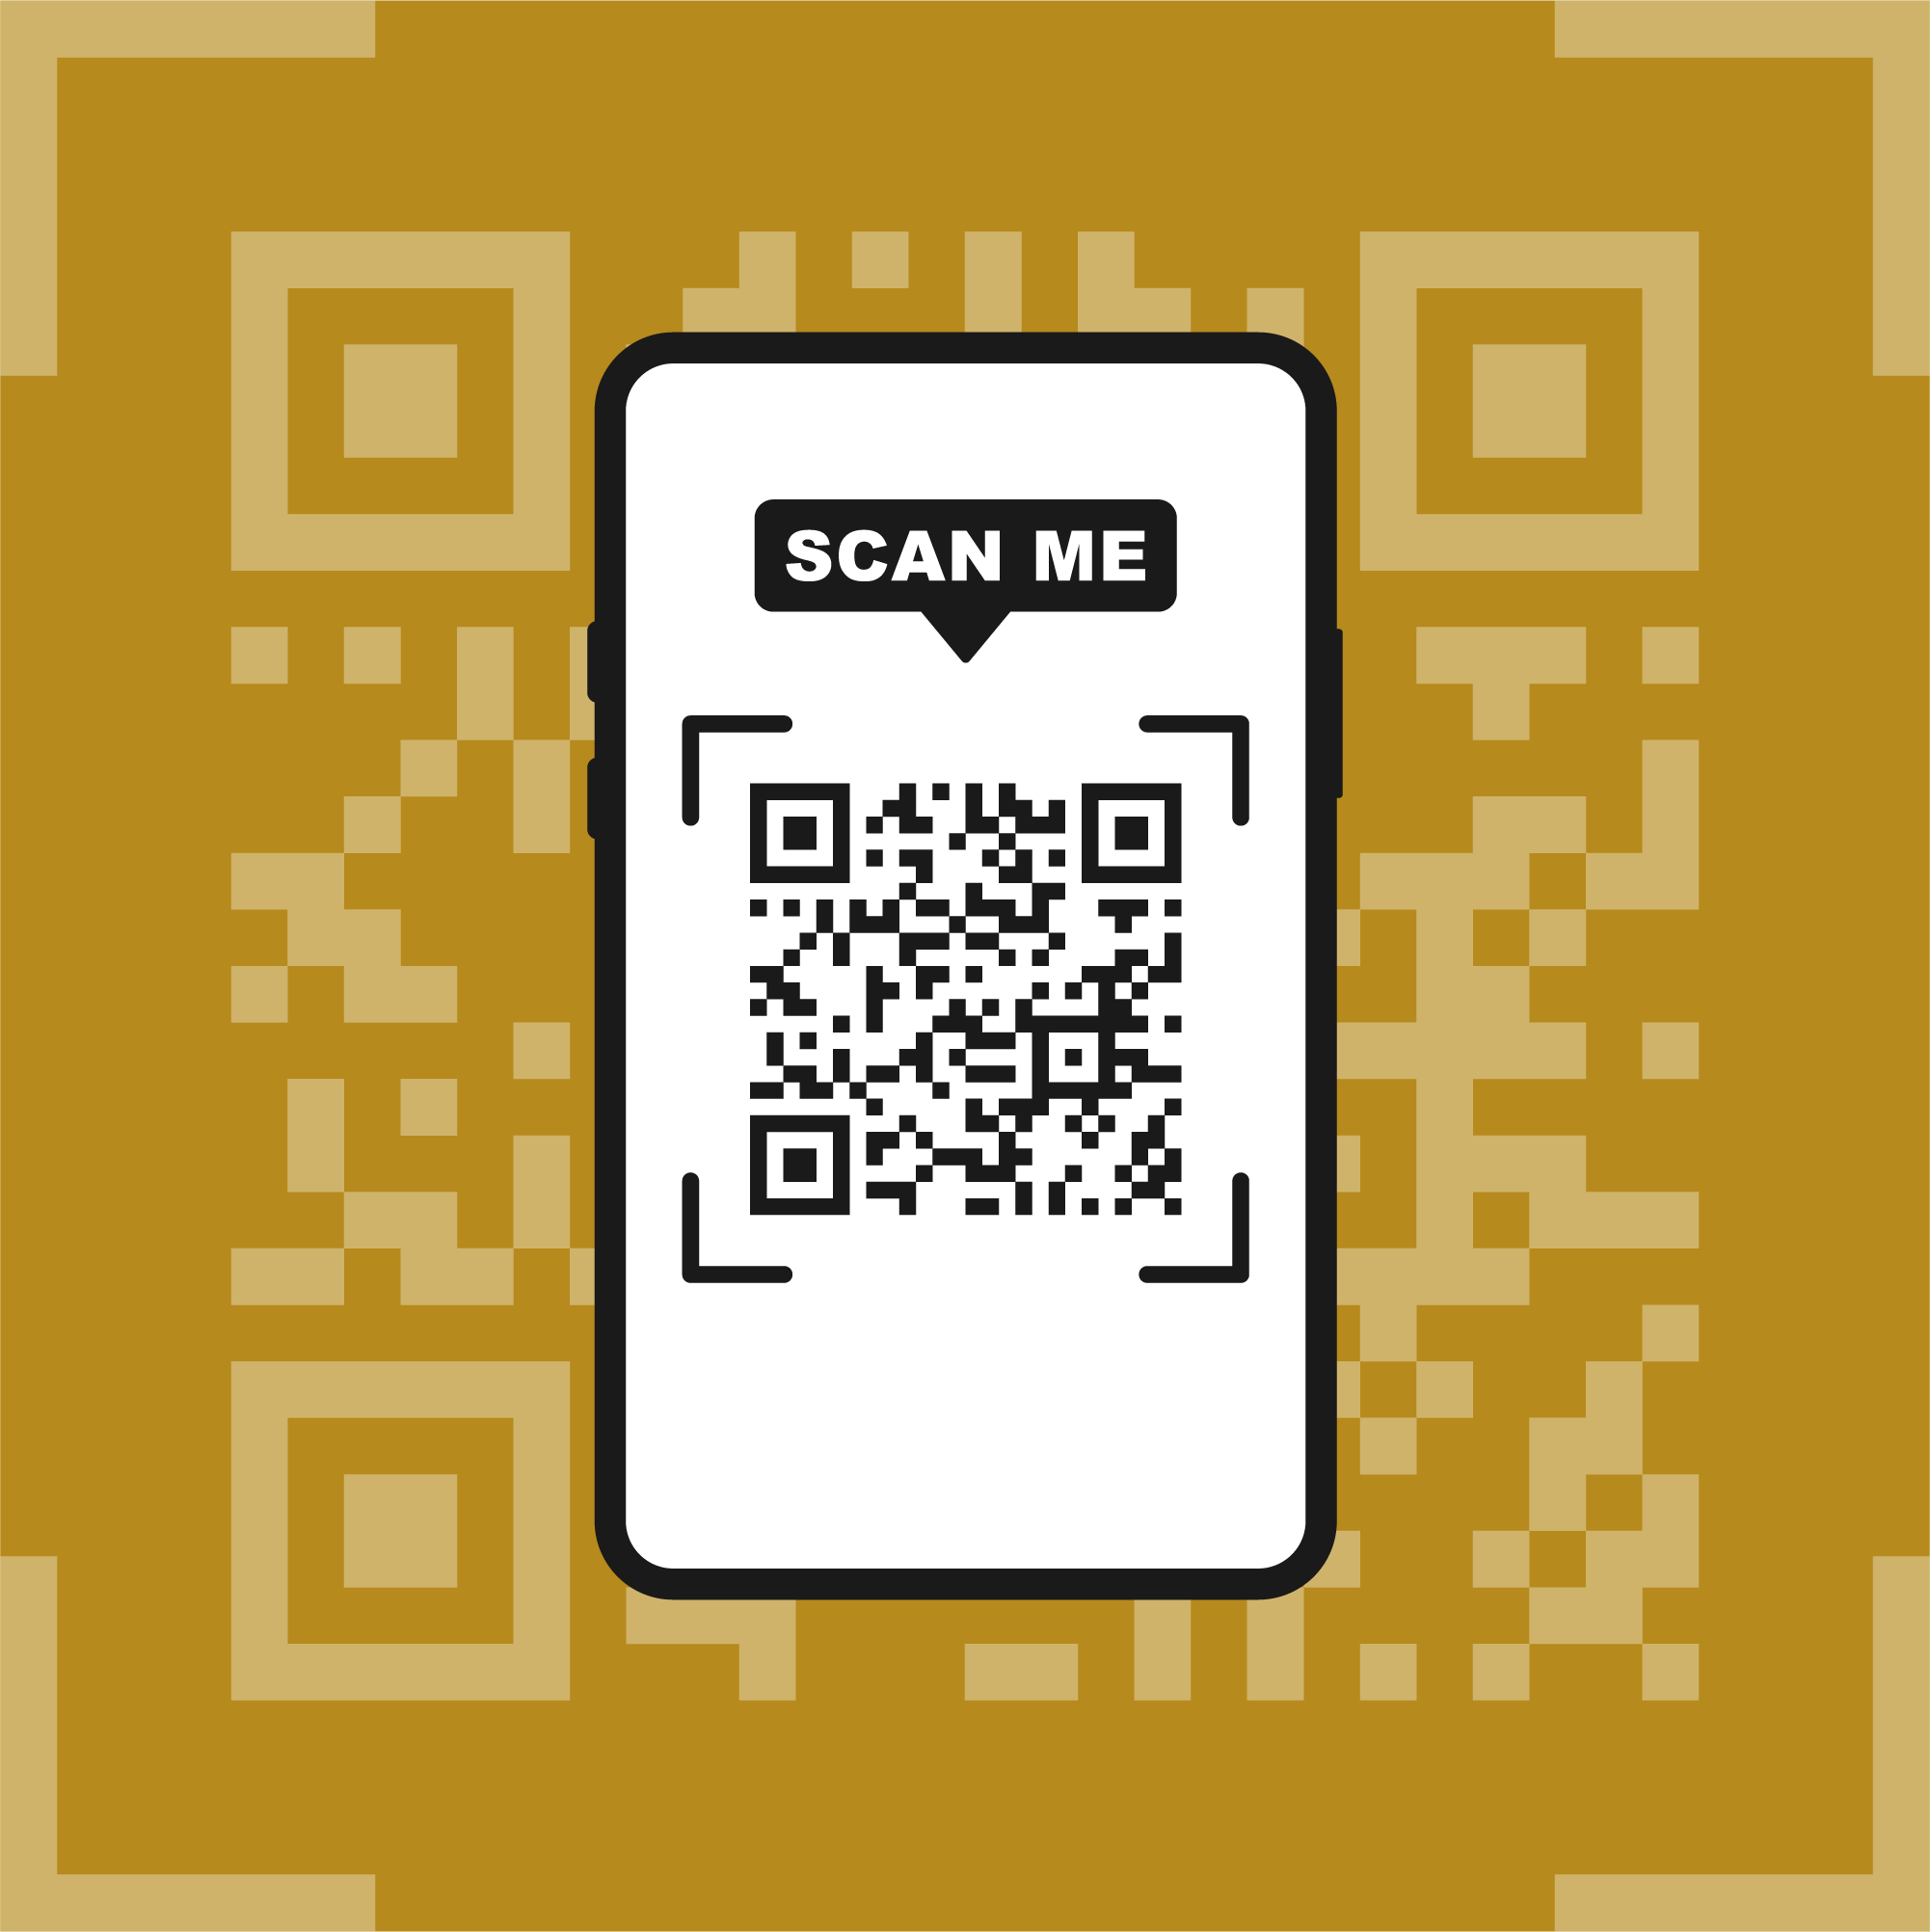 QR Codes - what's the real risk? 